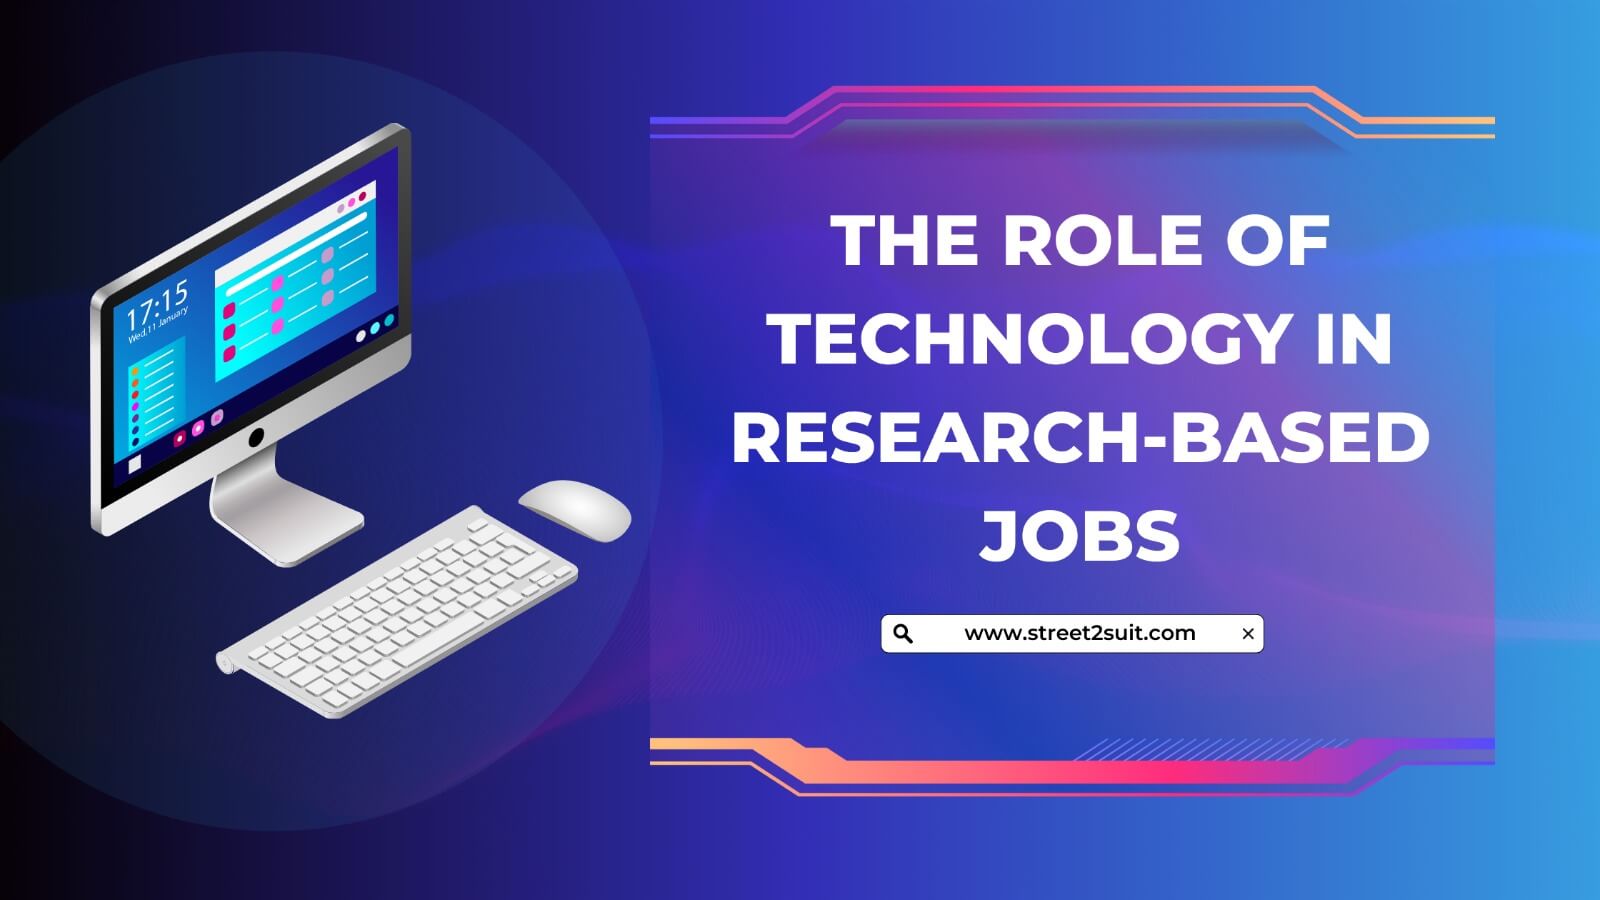 The Role of Technology in Research-based Jobs